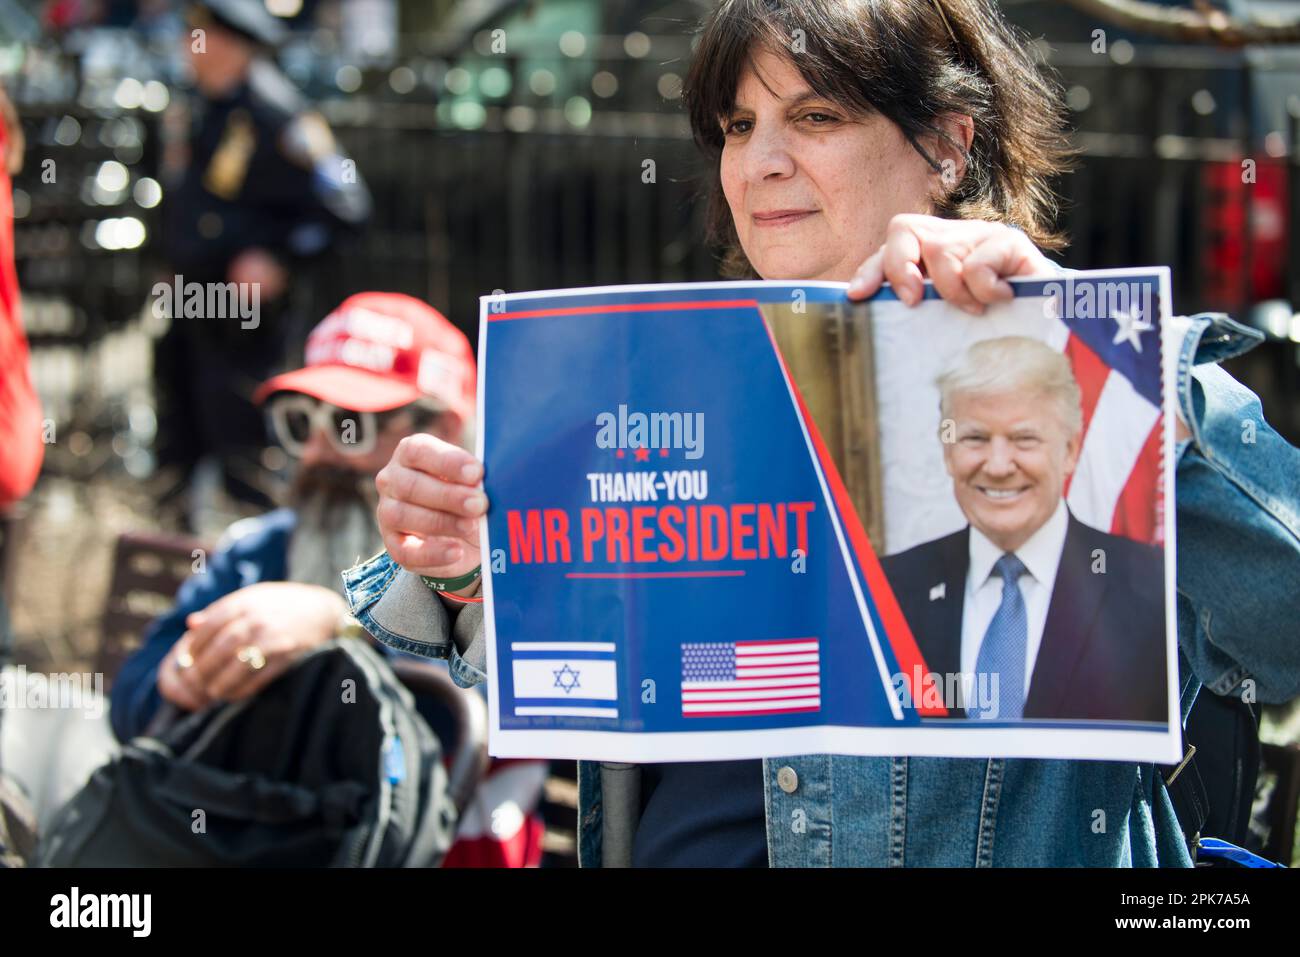 A woman supporter shows picture of former President Trump during his arraignment at Manhattan Criminal Court House, NYC. 04 April 2023. Stock Photo